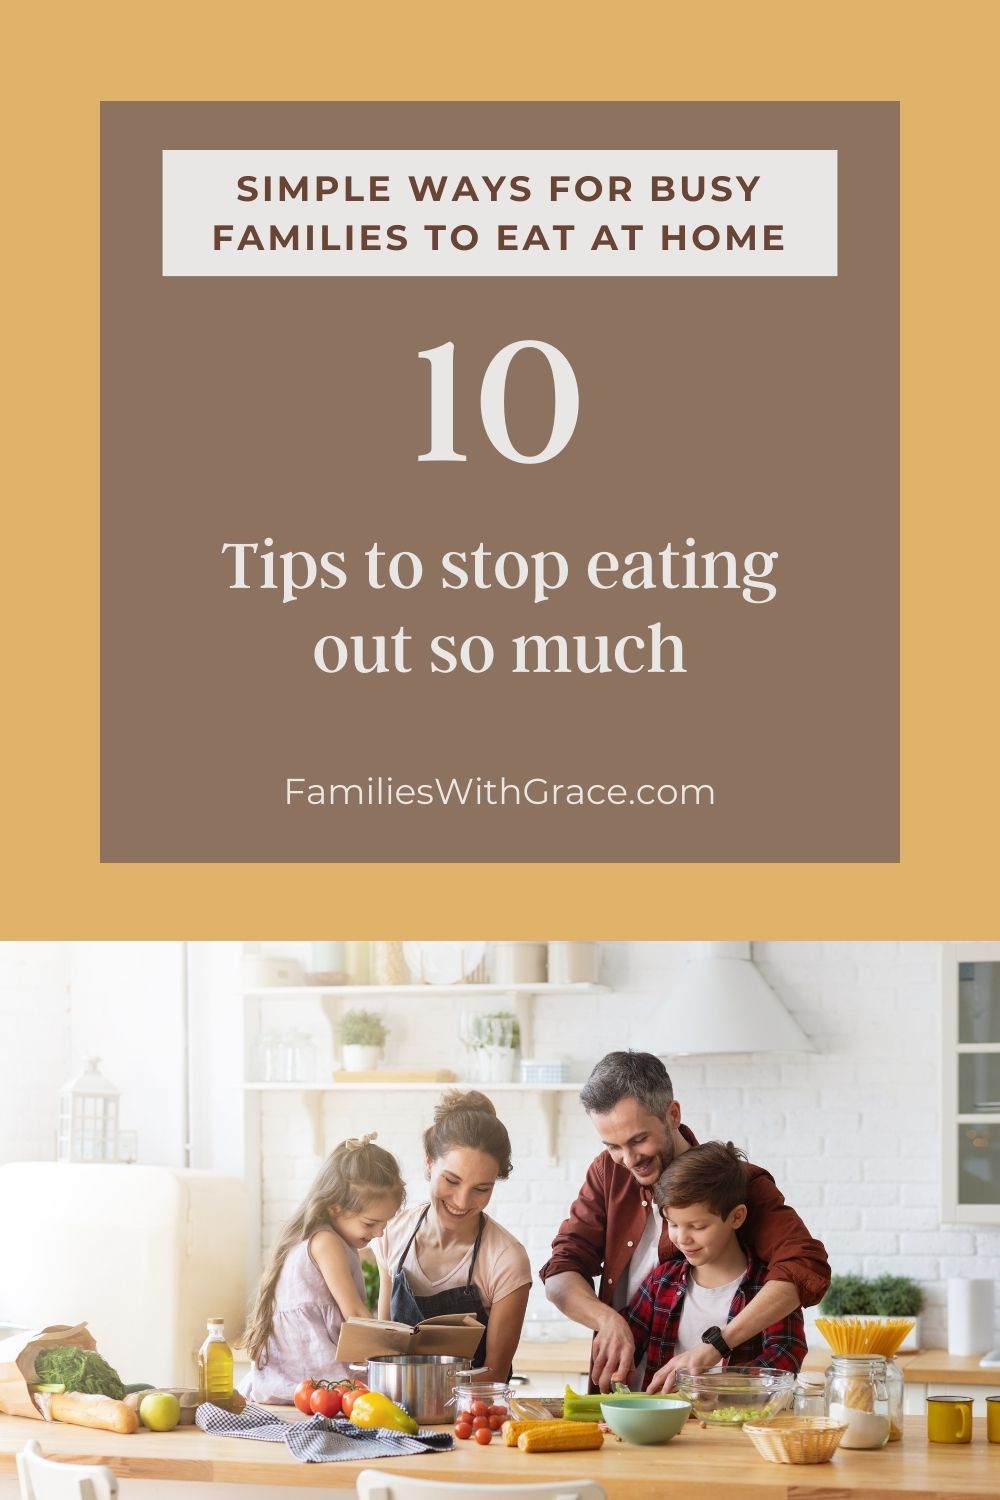 How to stop eating out as much: 10 Tips for busy families